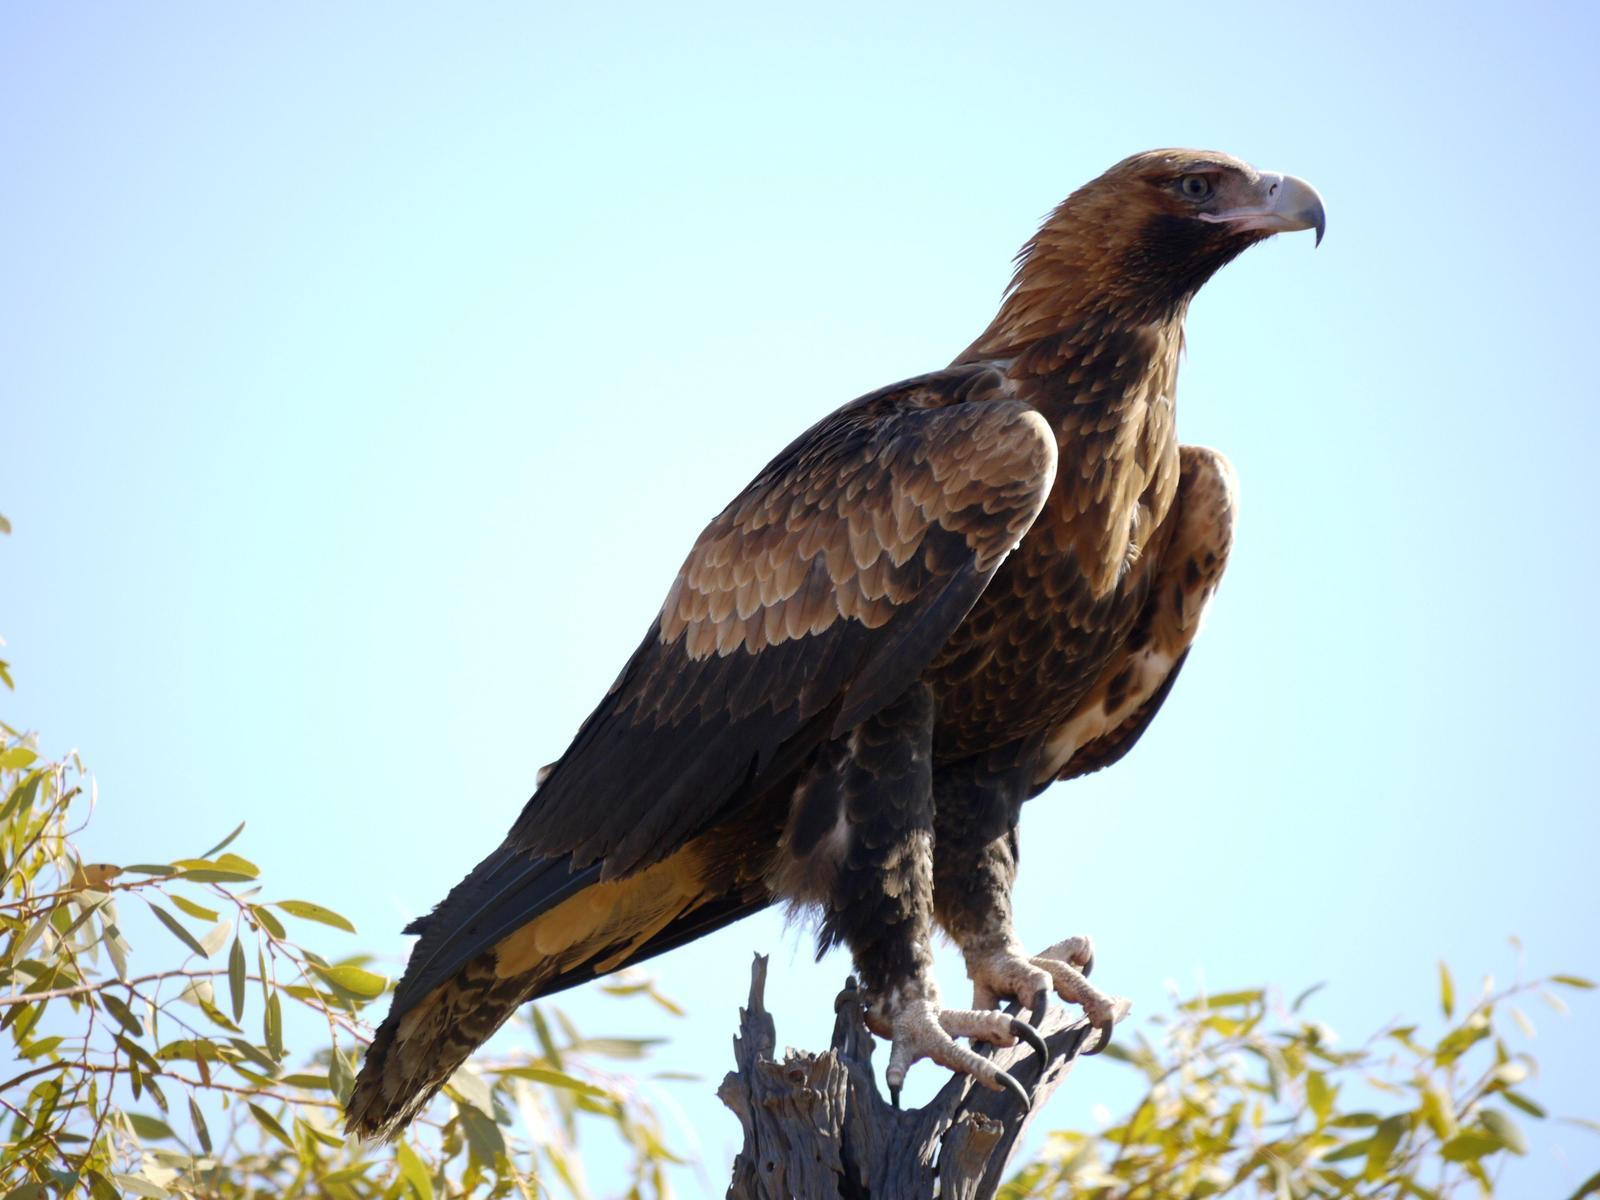 Wedge-tailed Eagle Photo by Peter Lowe